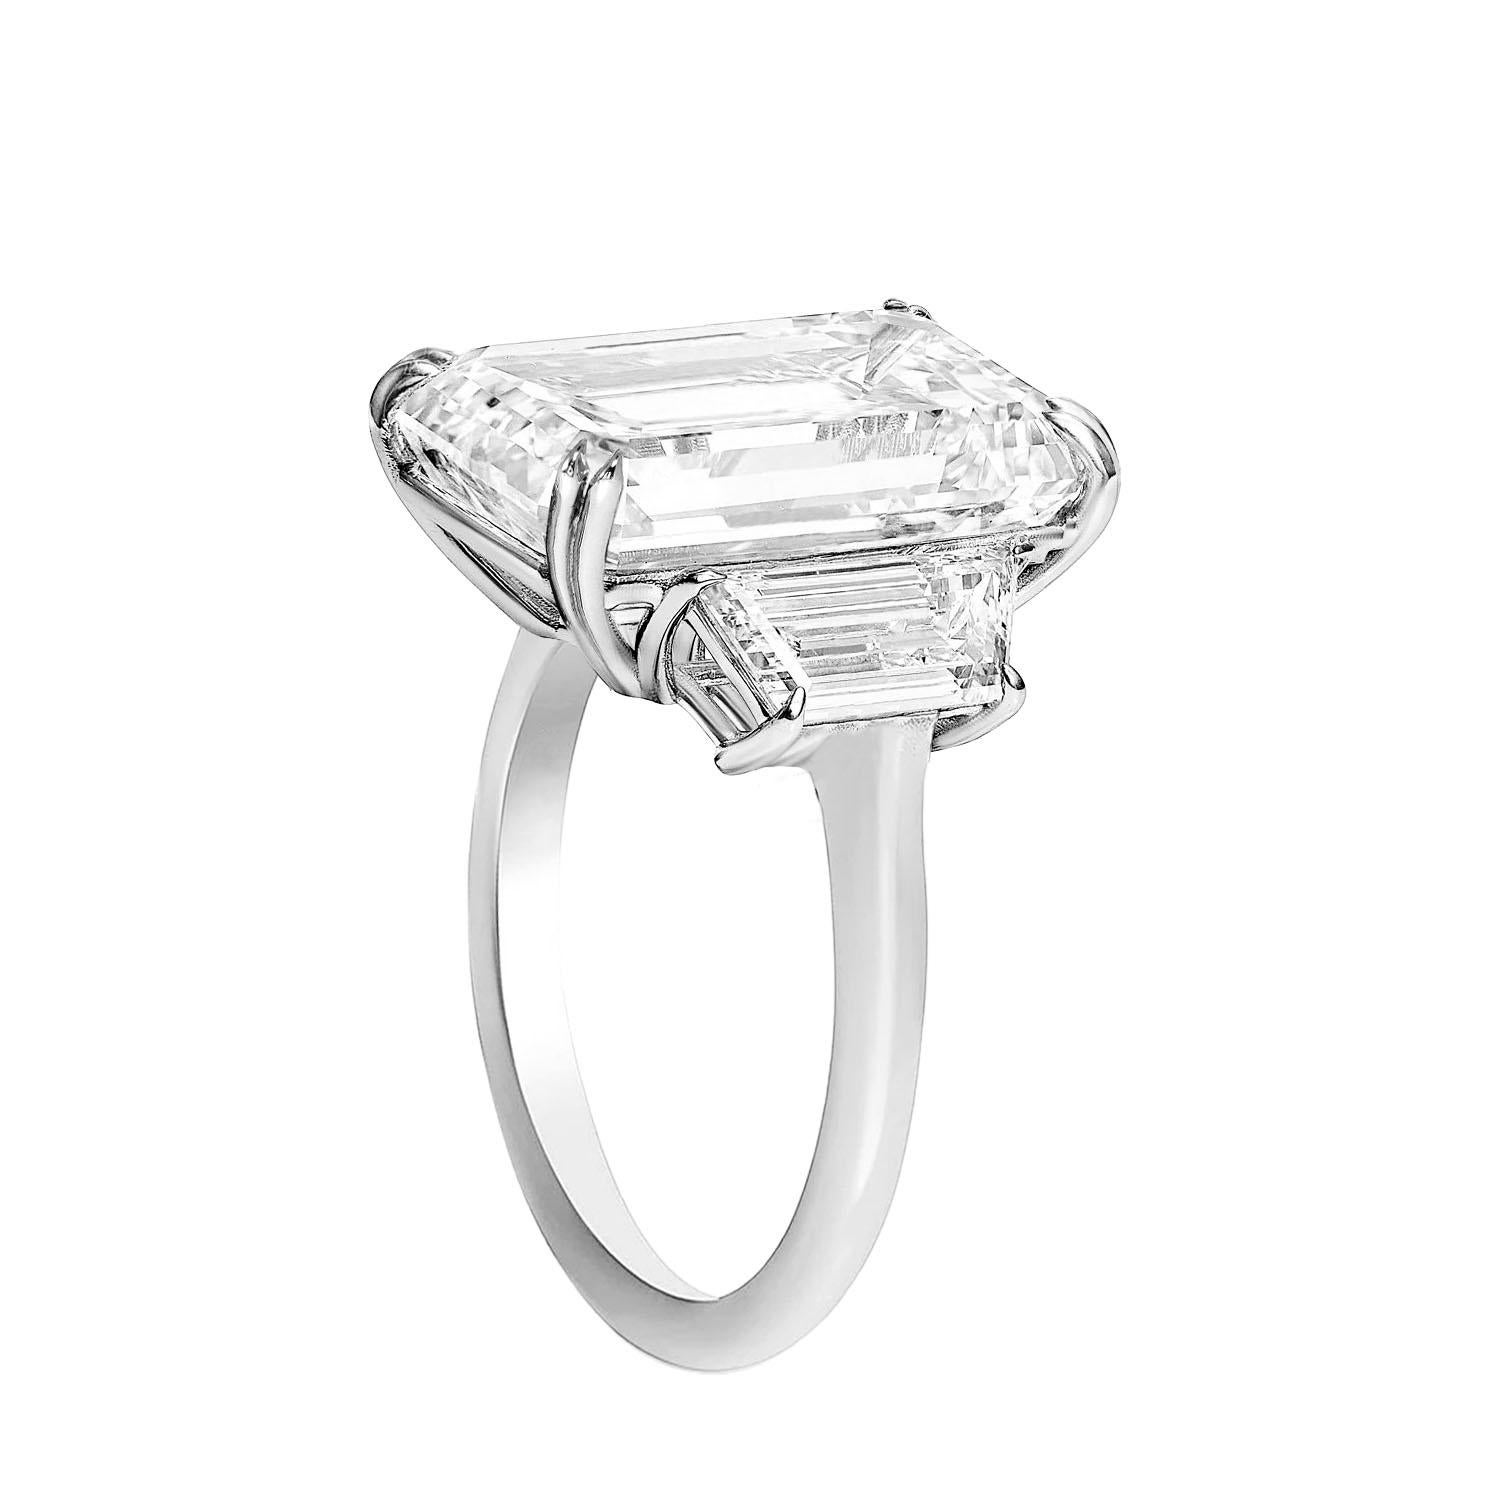 Introducing the epitome of elegance and sophistication: the GIA Certified 9.03 Carat Emerald Cut Diamond Ring. This stunning piece features a magnificent 9.03 carat emerald cut diamond, expertly graded by the Gemological Institute of America (GIA)